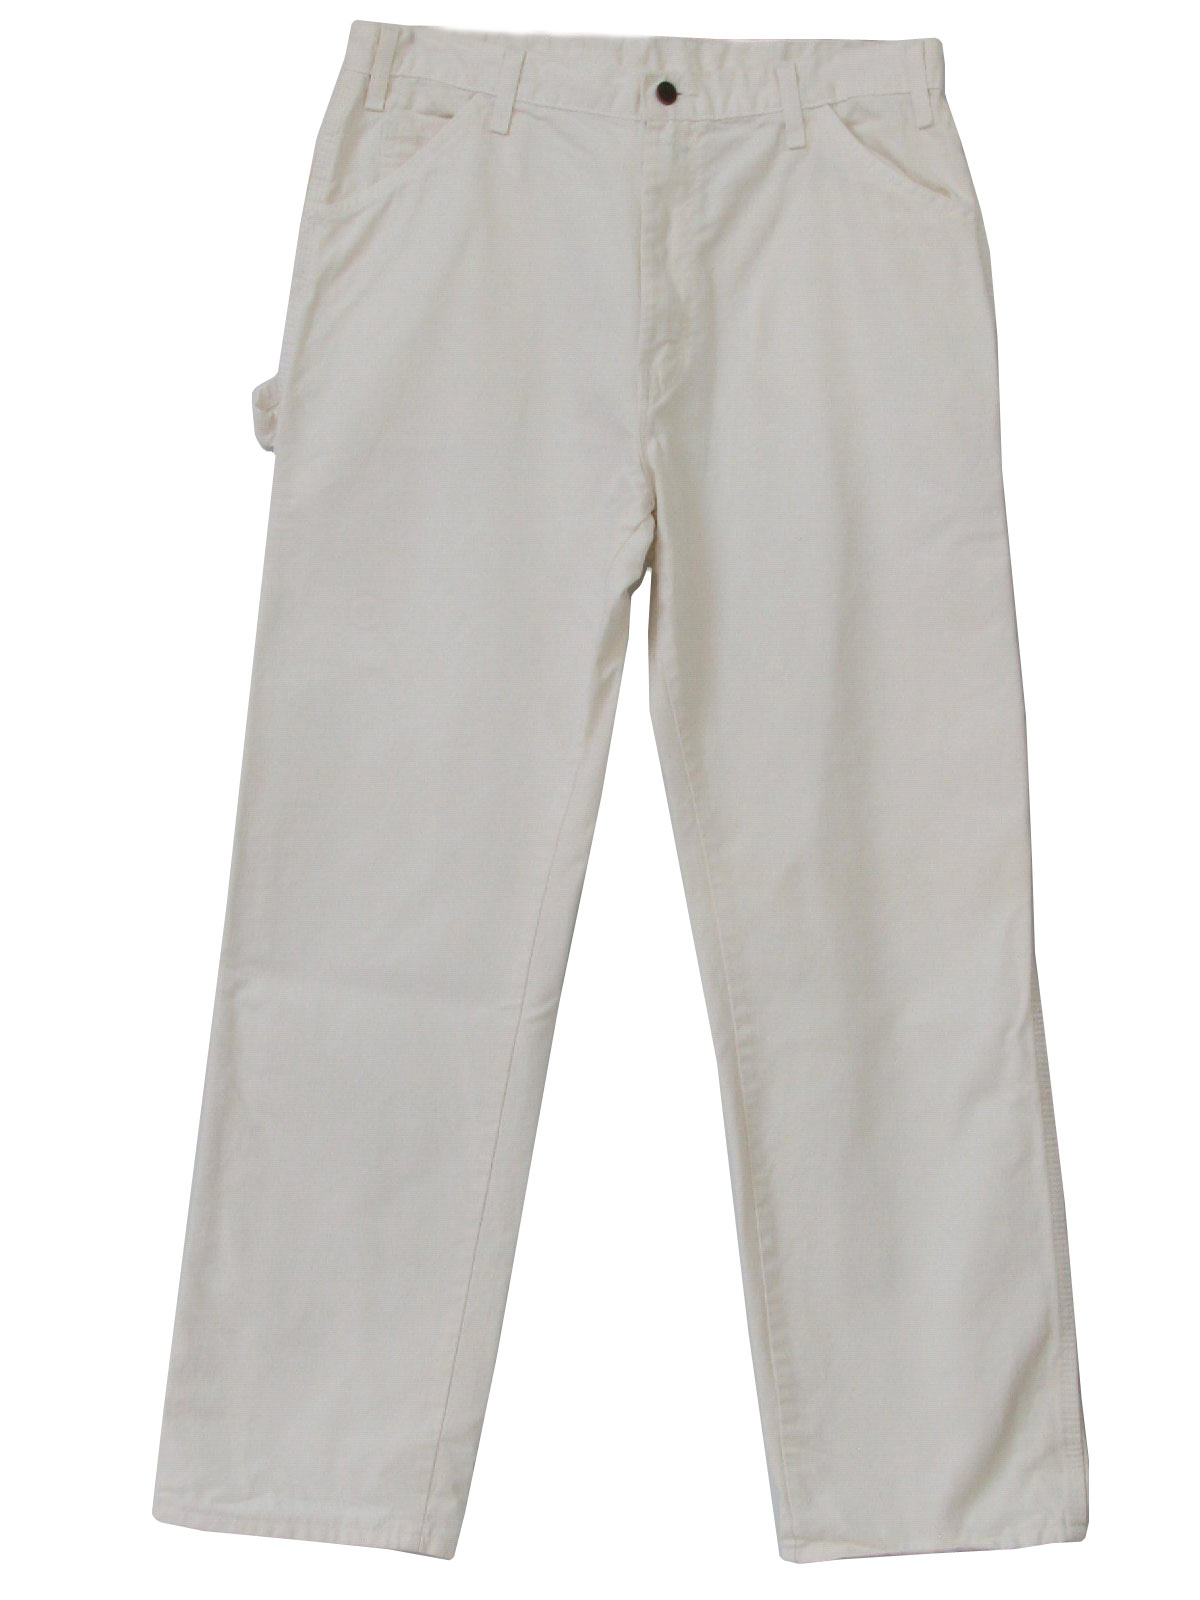 Vintage 80s Pants: 80s -Dickies- Mens white straight leg relaxed fit ...